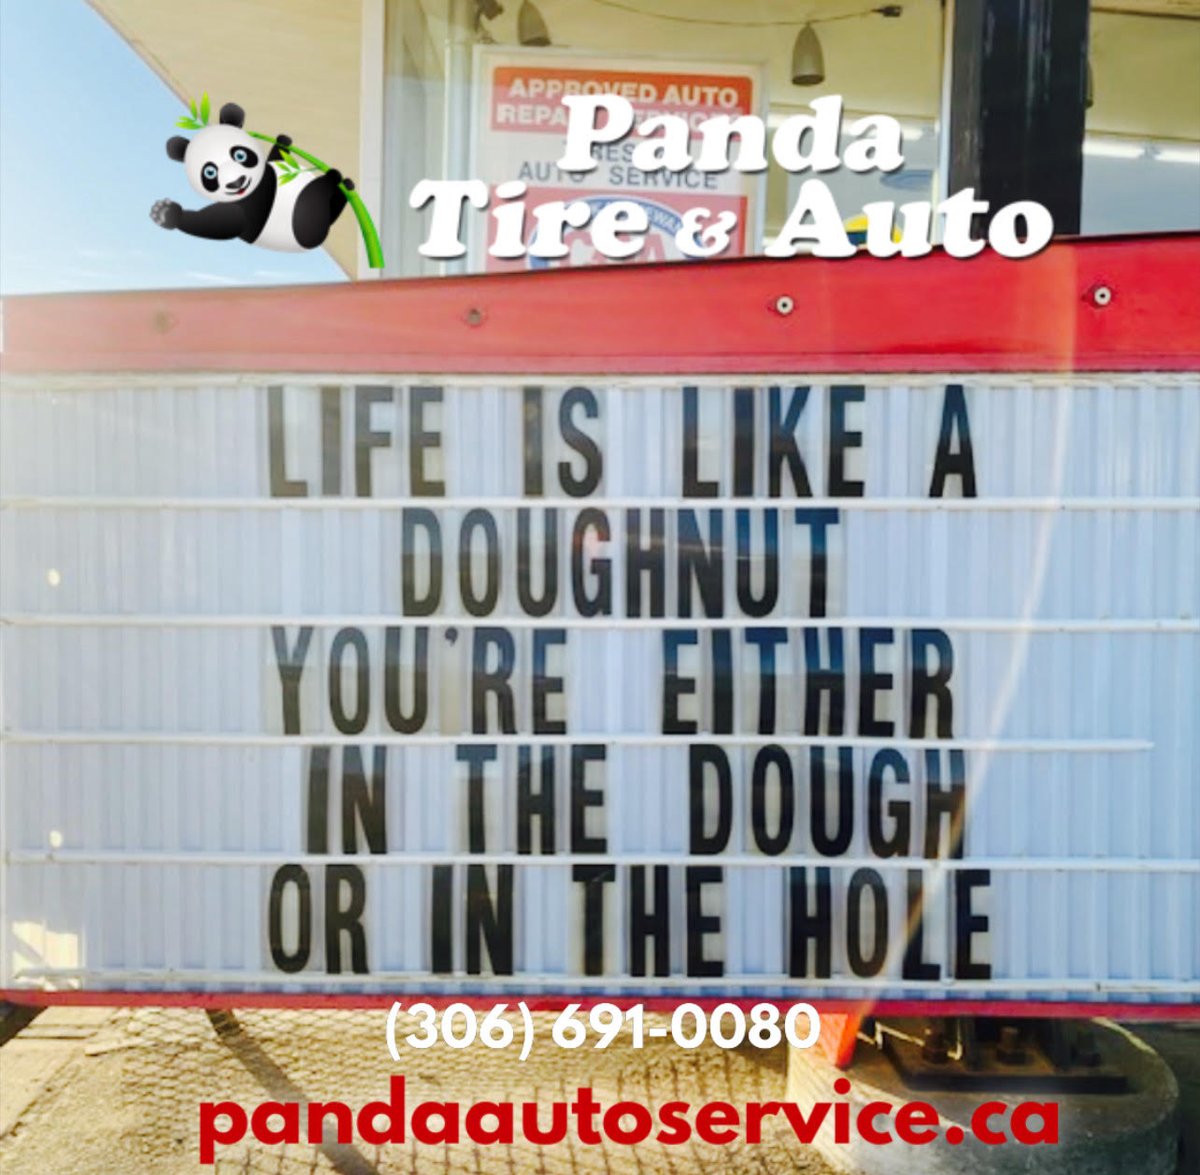 Donut go breaking my heart (I couldn’t if I fried).

Have a great weekend Moose Jaw.

Call 306-691-0080
Book online: pandaautoservice.ca
#moosejaw #pandatire #locallyowned #SmallBusinessEveryDay #supportlocal #MapleLeafBakery #TasteByKatrina